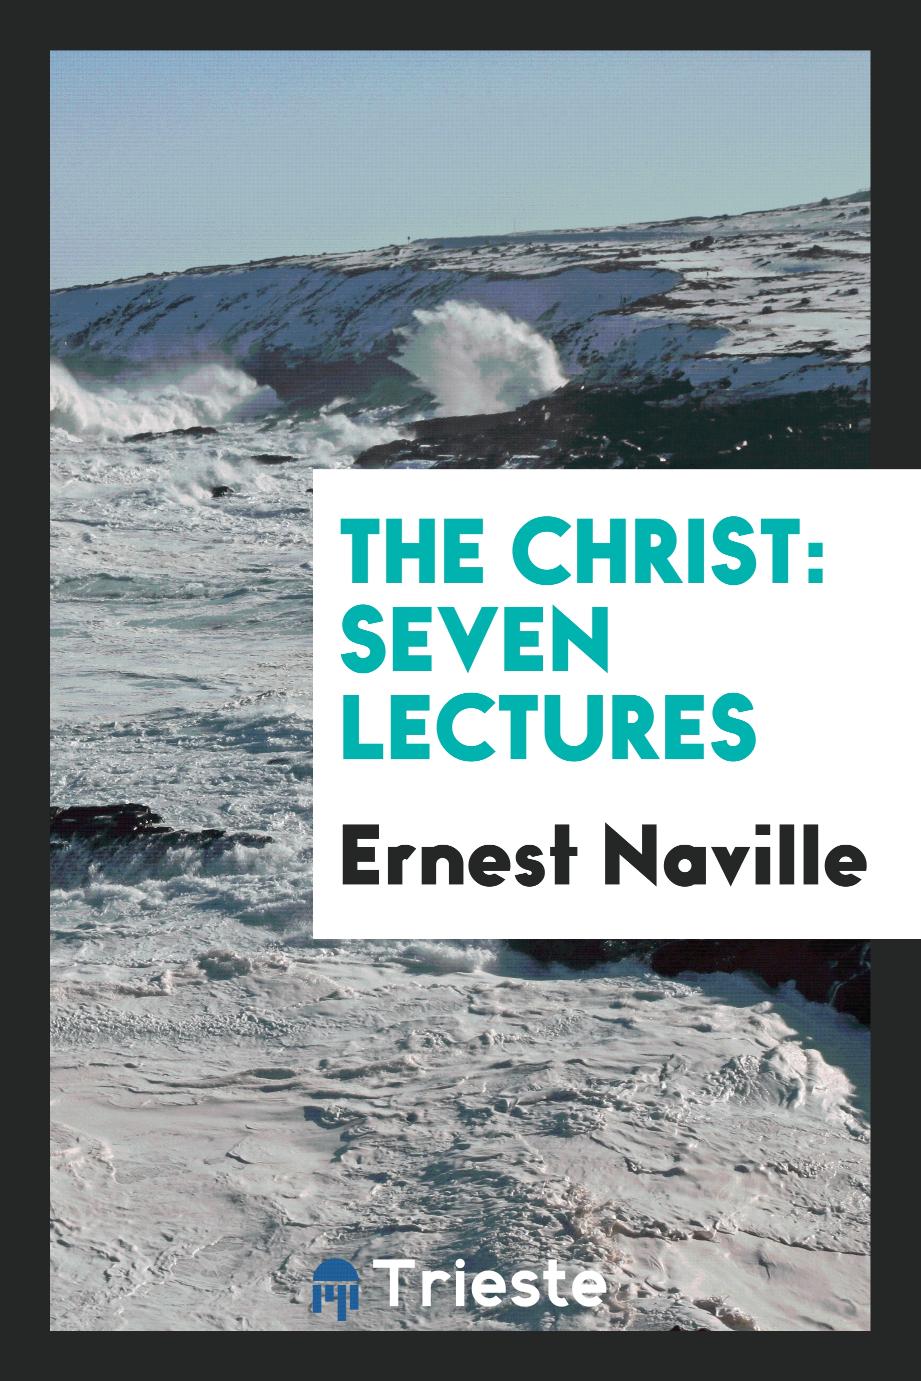 The Christ: seven lectures